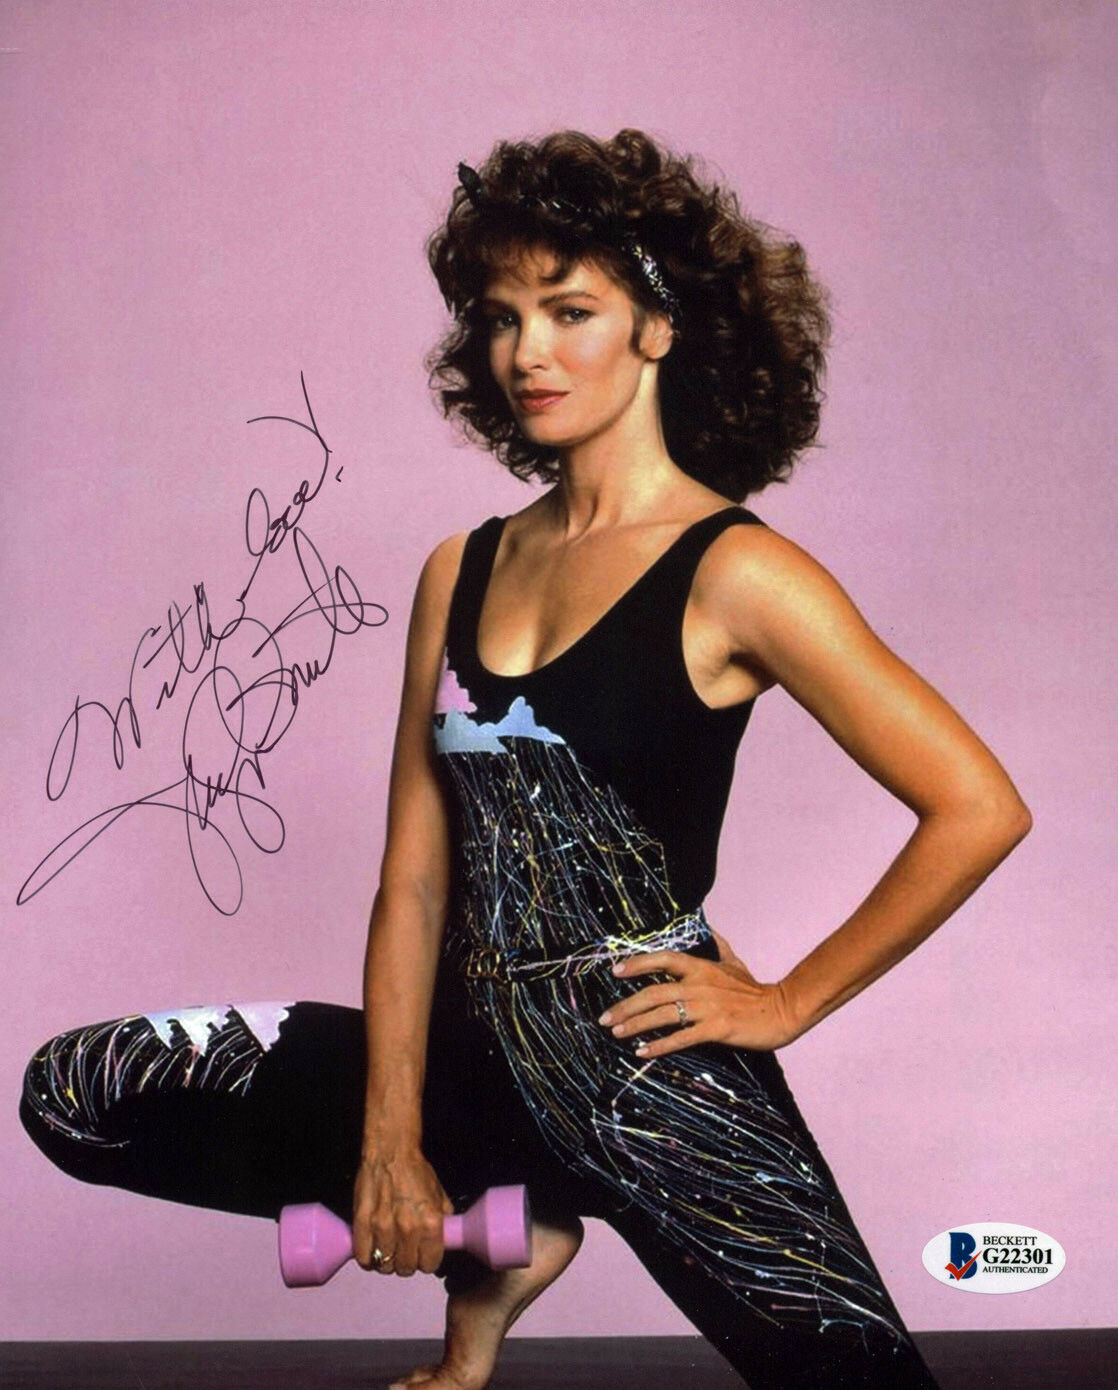 Jaclyn Smith Signed Psa/dna Certified 8x10 Photo Authenticated Autograph.